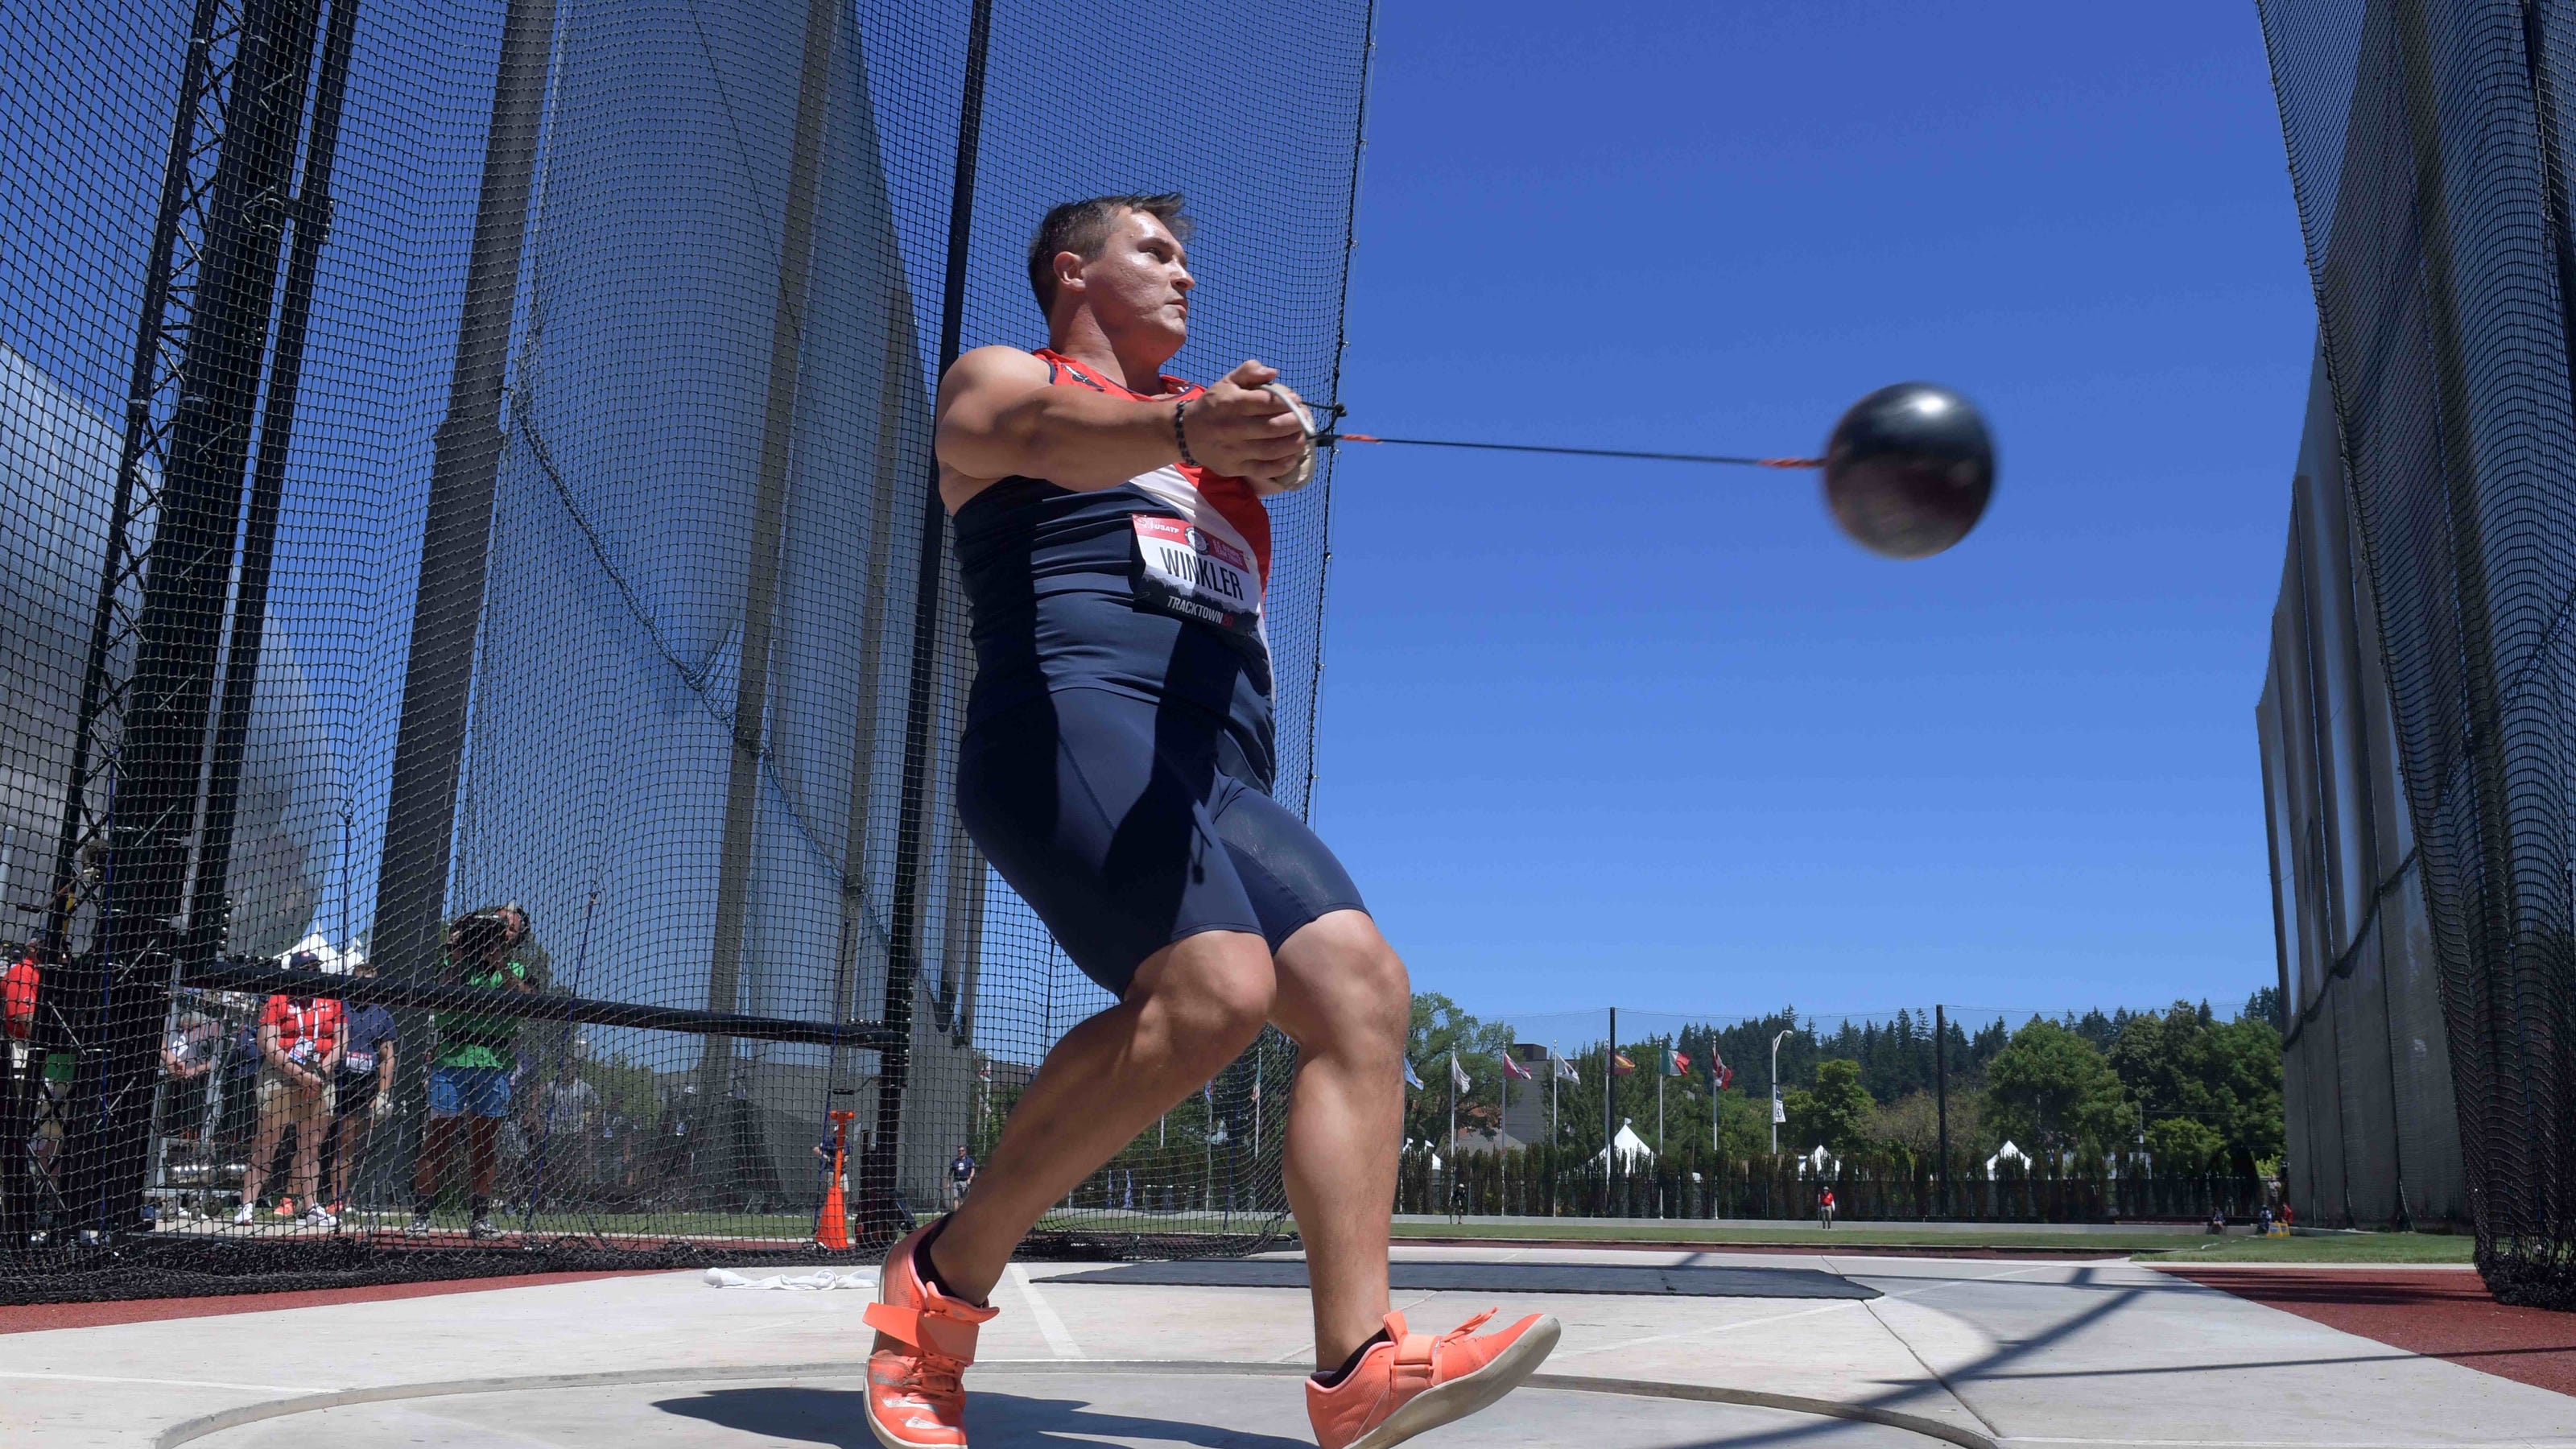 Men's hammer throw first of 7 finals at U.S. Olympic Track & Field